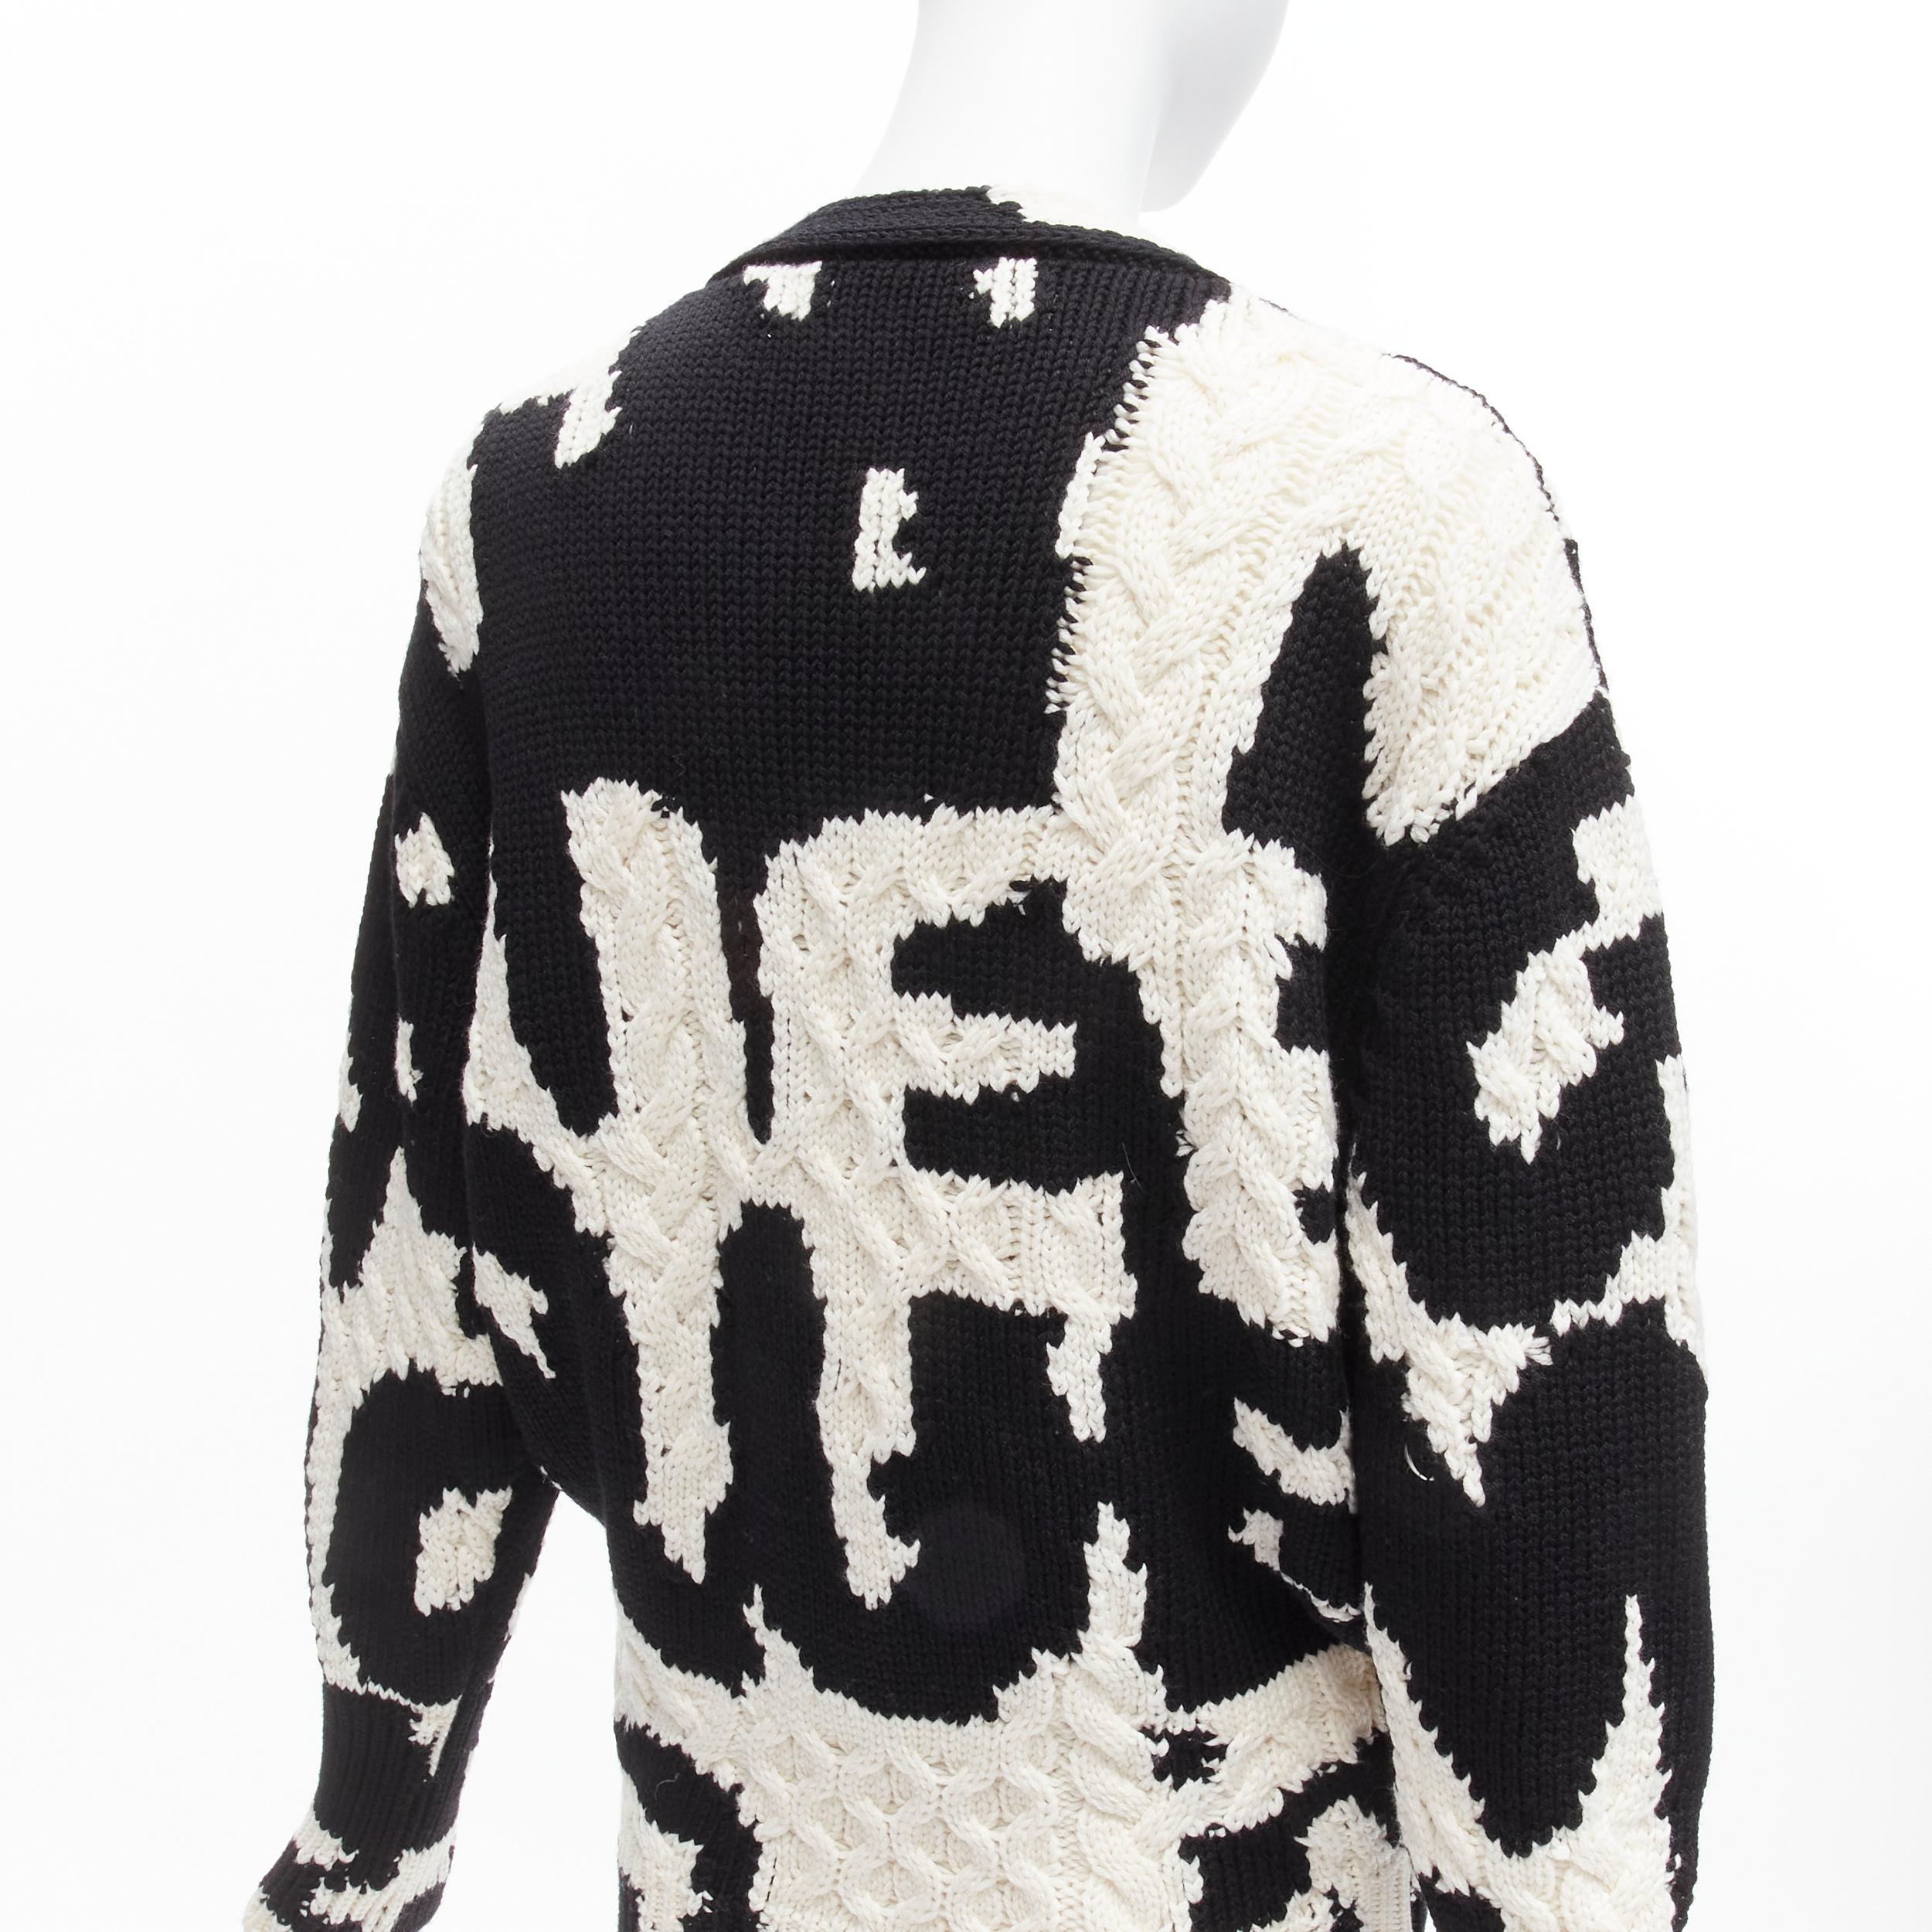 ALEXANDER MCQUEEN 2022 Brush black white graffiti logo intarsia knit wool cardigan XS
Reference: AAWC/A00463
Brand: Alexander McQueen
Designer: Sarah Burton
Collection: 2022 Brush
Material: Wool
Color: Black, White
Pattern: Abstract
Closure: